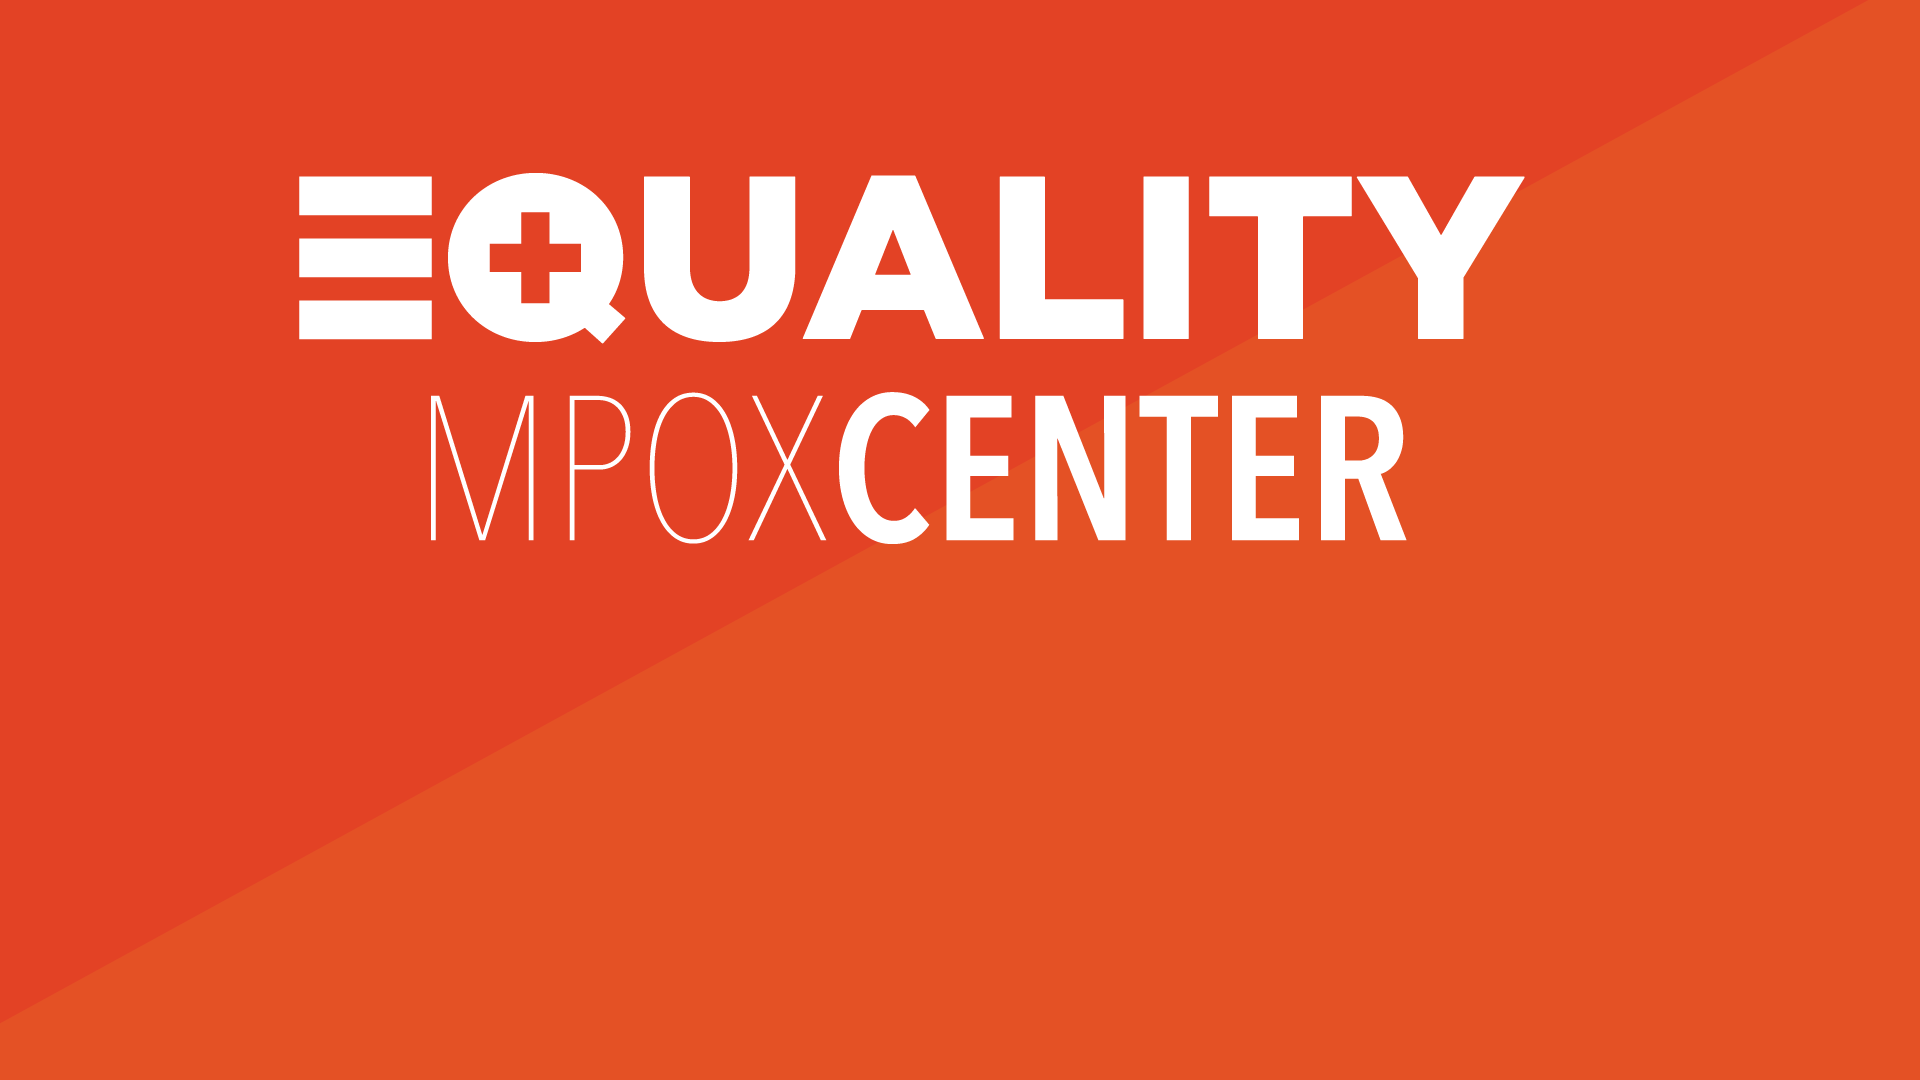 Mpox Center Equality TexasEquality Texas